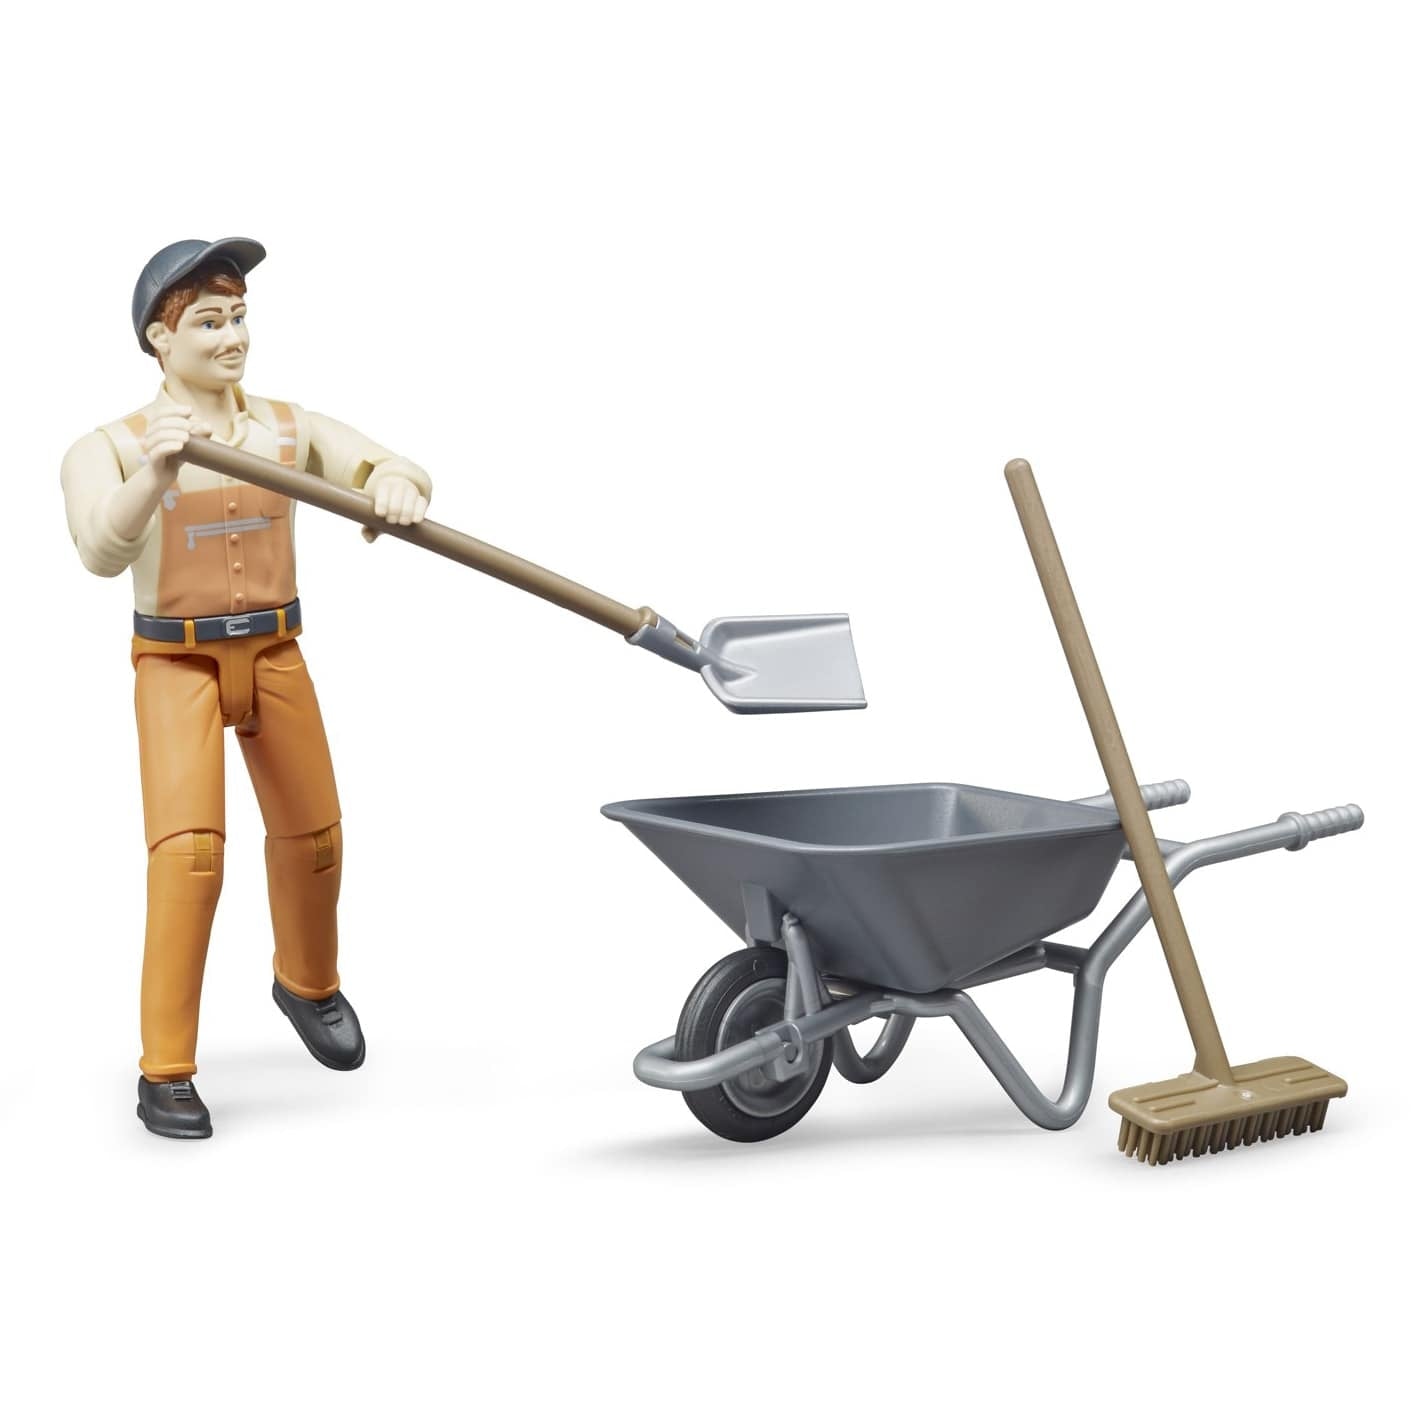 Municiple Worker Figure Set with Barrow and Tools